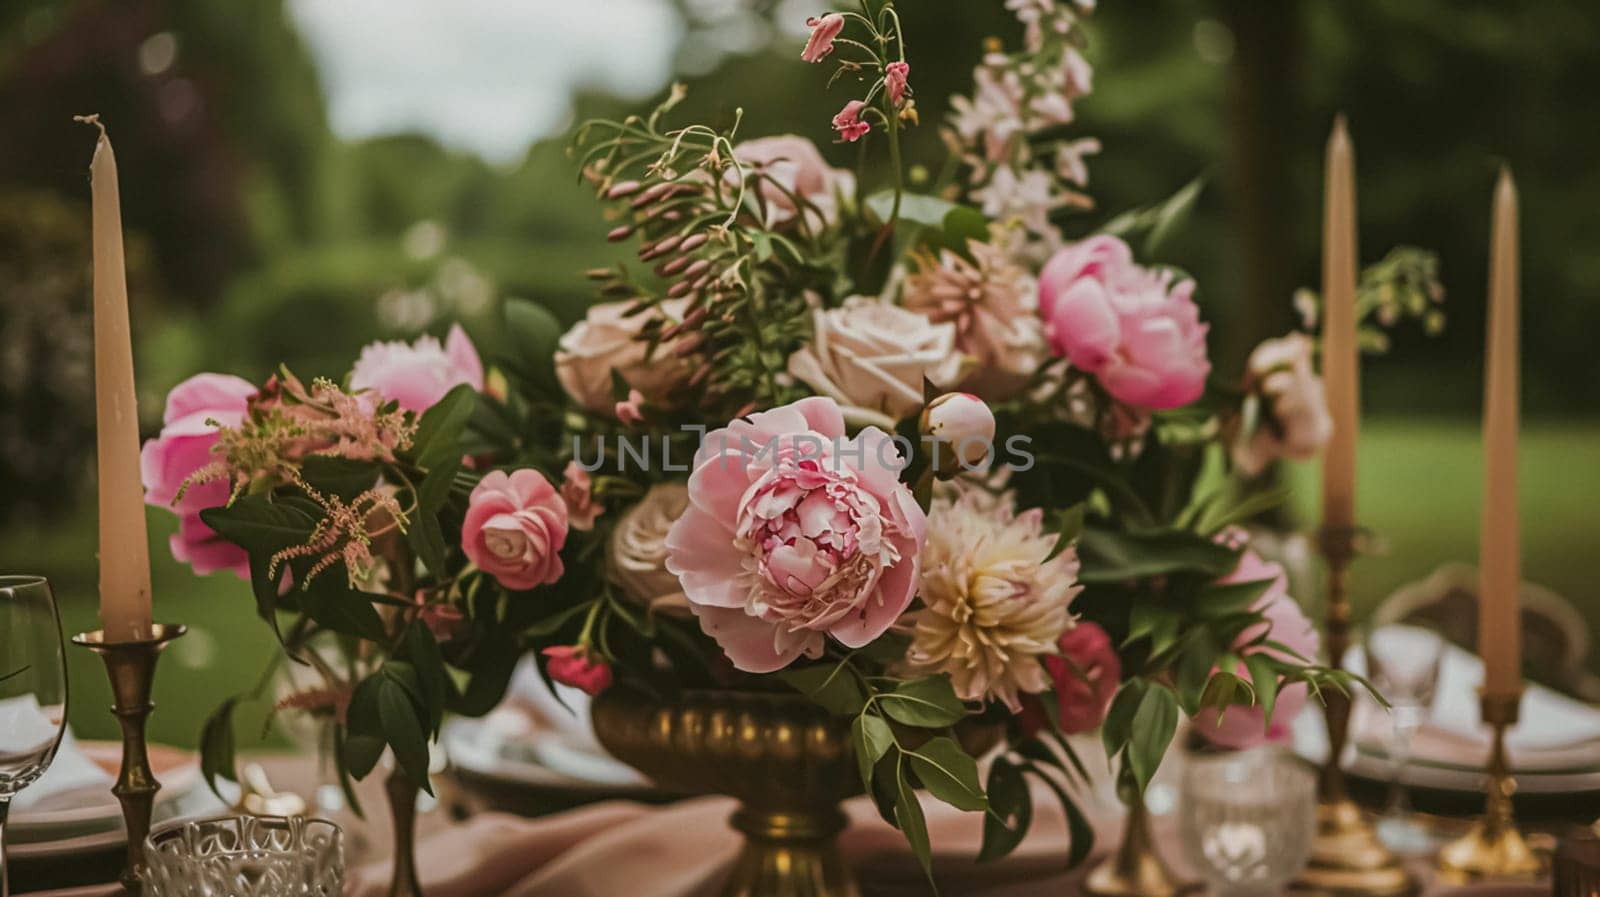 Wedding decoration with peonies, floral decor and event celebration, peony flowers and wedding ceremony in the garden, English country style by Anneleven